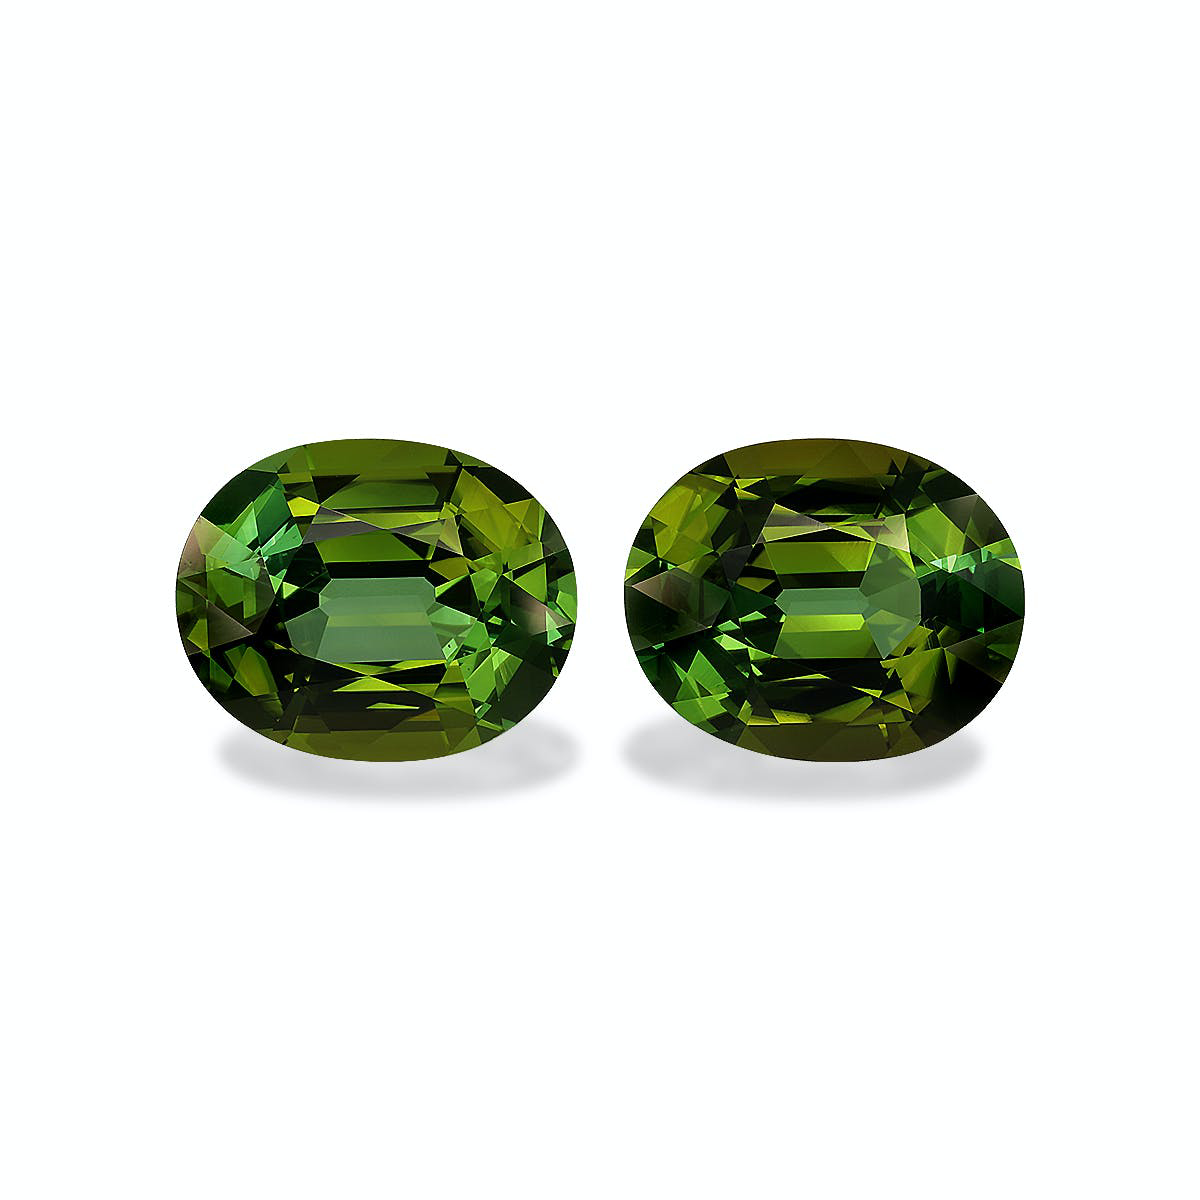 Picture of Forest Green Tourmaline 29.42ct - Pair (TG1566)